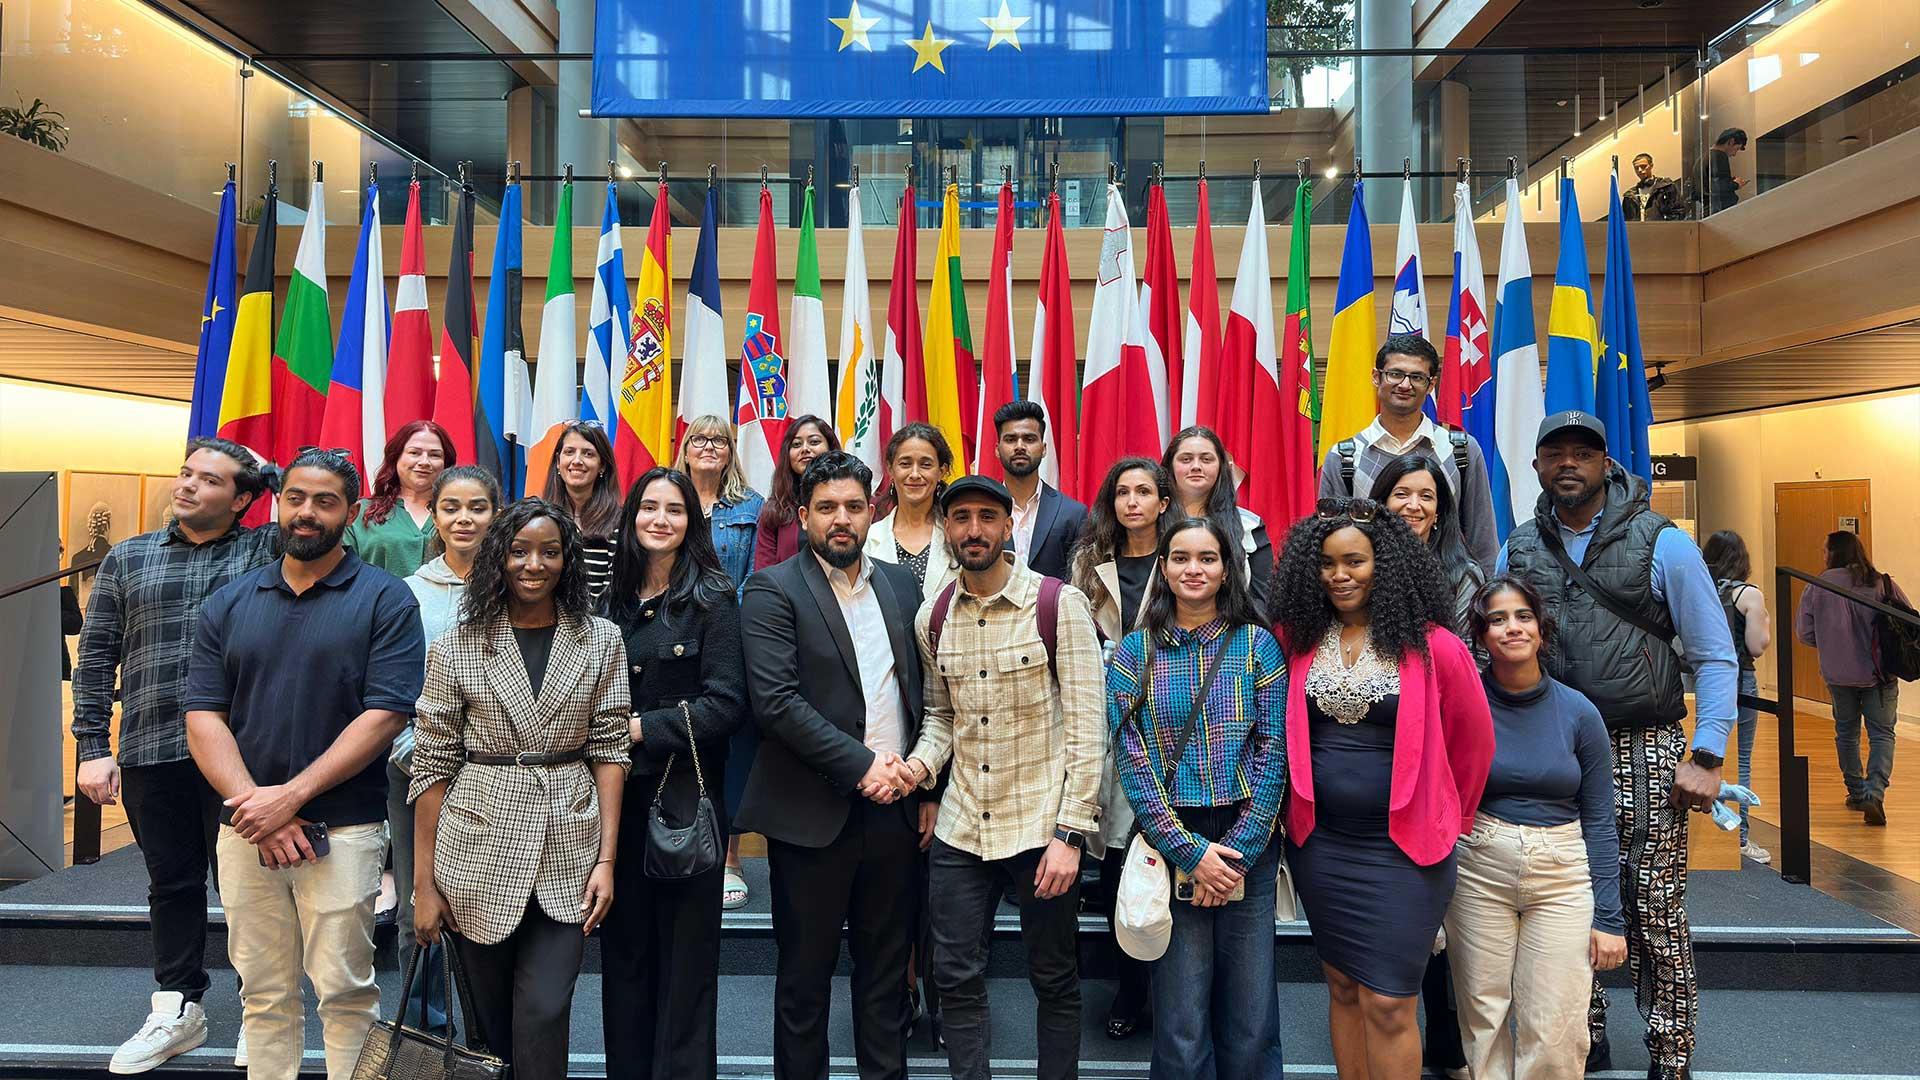 Students from Middlesex University Dubai and Middlesex University London recently visited the Council of Europe institutions and the European Union Parliament based in Strasbourg, France for the 6th Annual Strasbourg Study Trip.